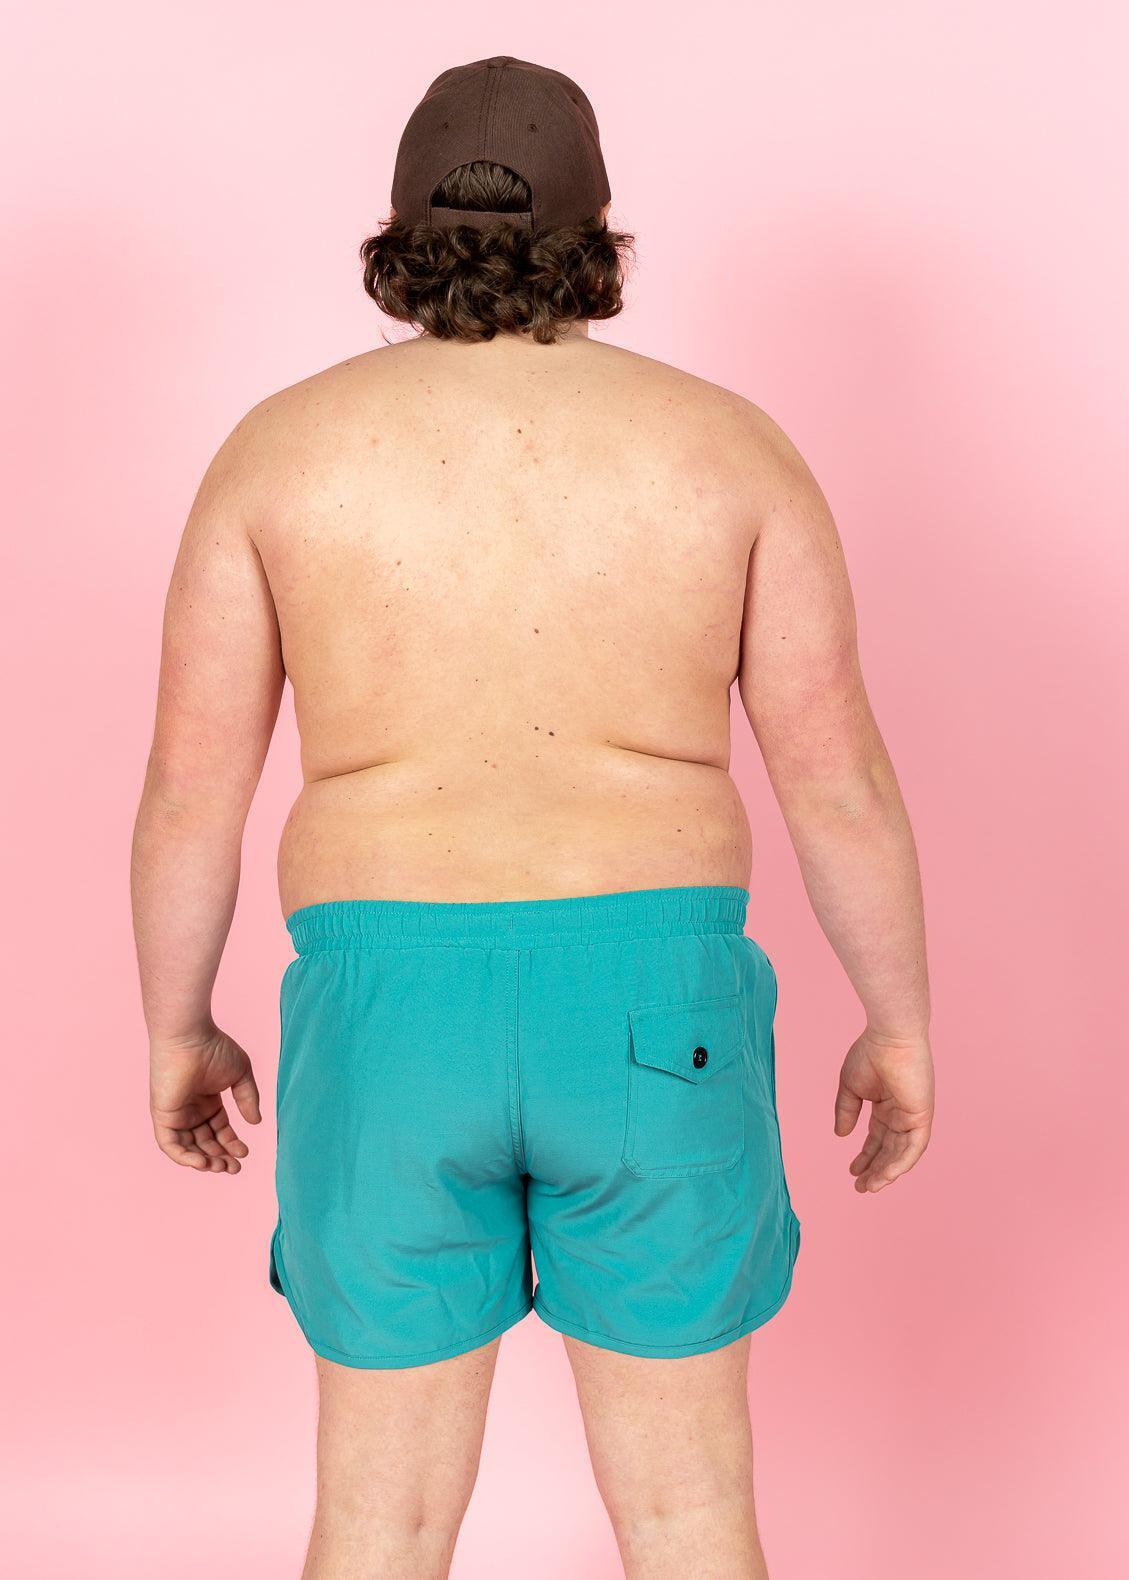 Mens Swimsuit - Shorts - Teal Waves